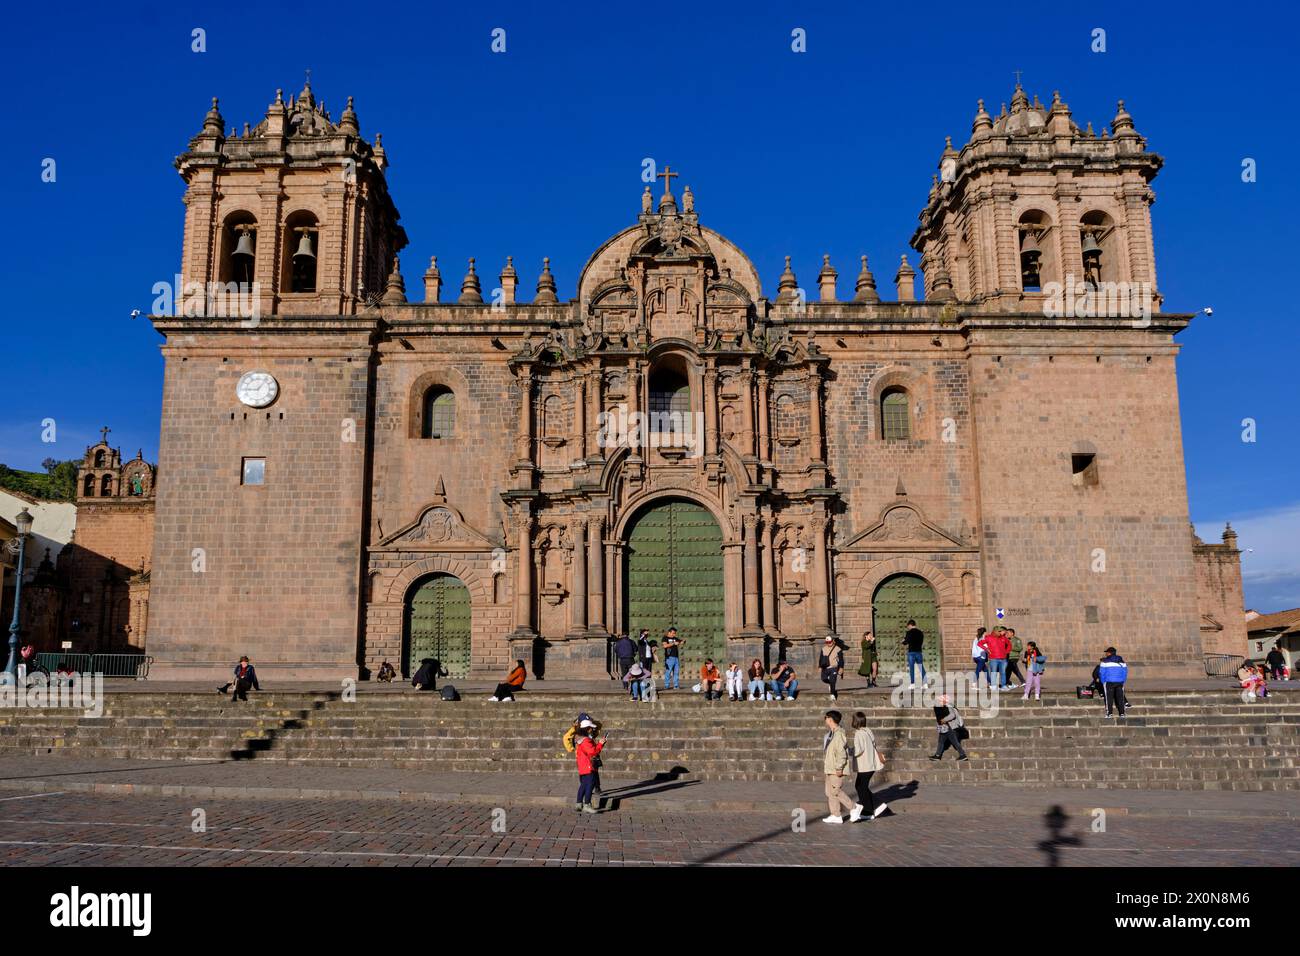 Peru, province of Cuzco, Cuzco, listed as a UNESCO World Heritage Site, Plaza de Armas, Notre-Dame-de-l'Assomption cathedral in colonial baroque style Stock Photo